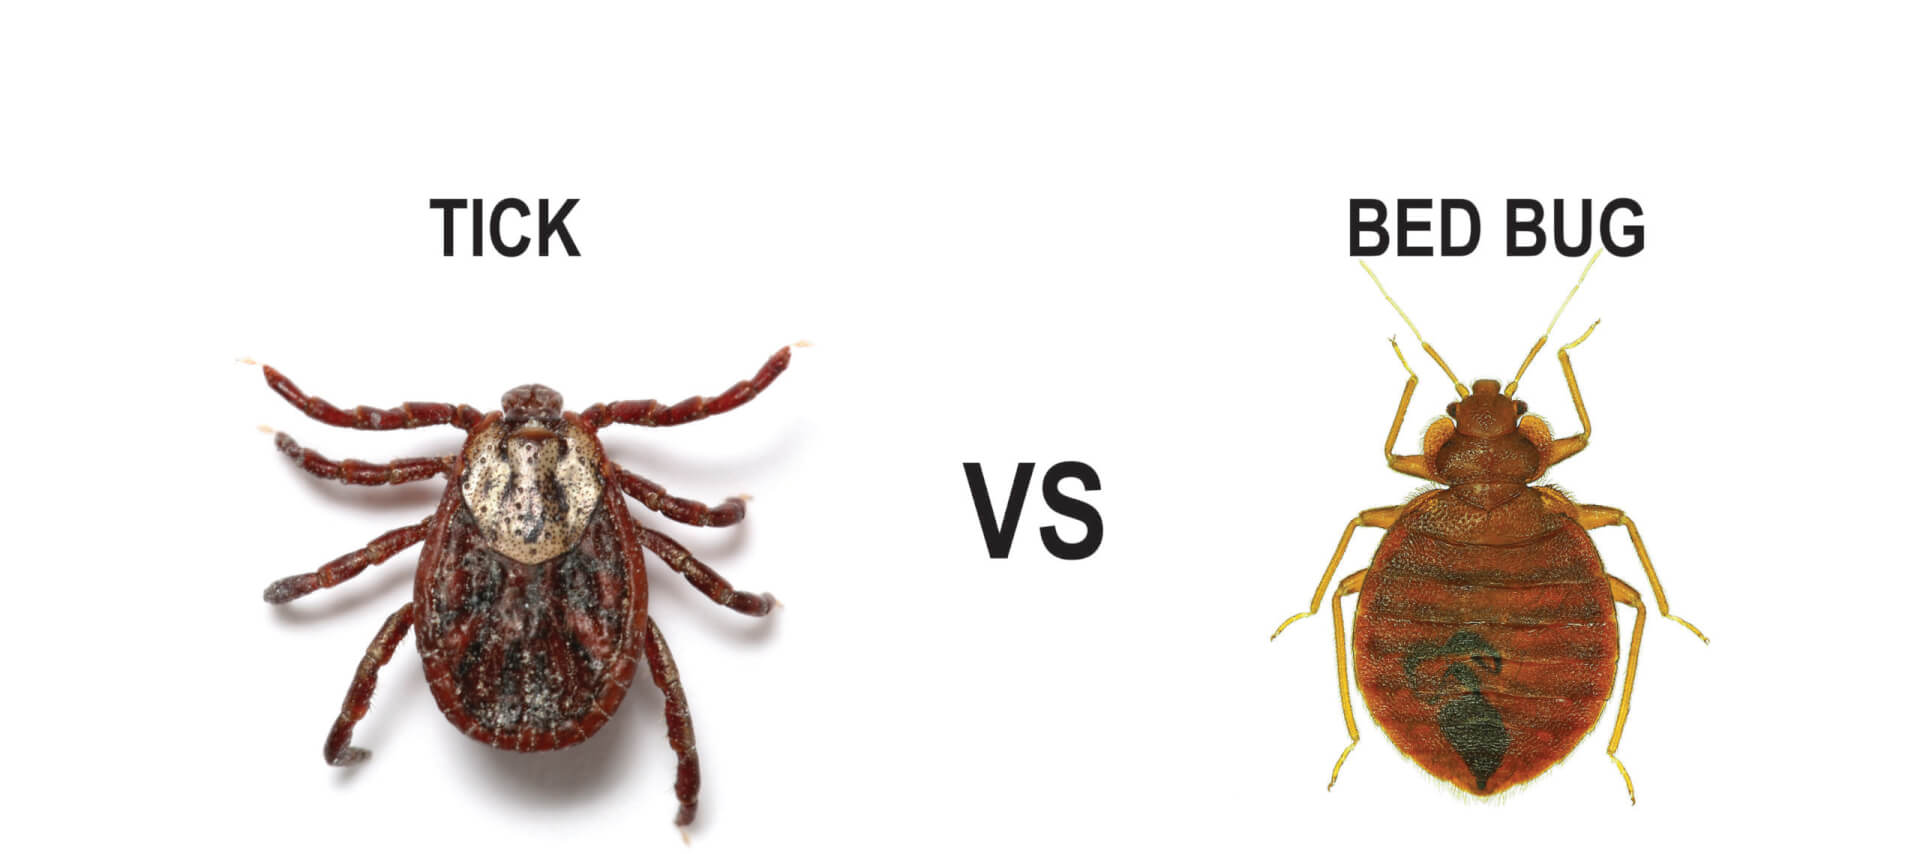 Ticks vs Bed Bugs: The Difference Between Ticks &amp; Bed Bugs